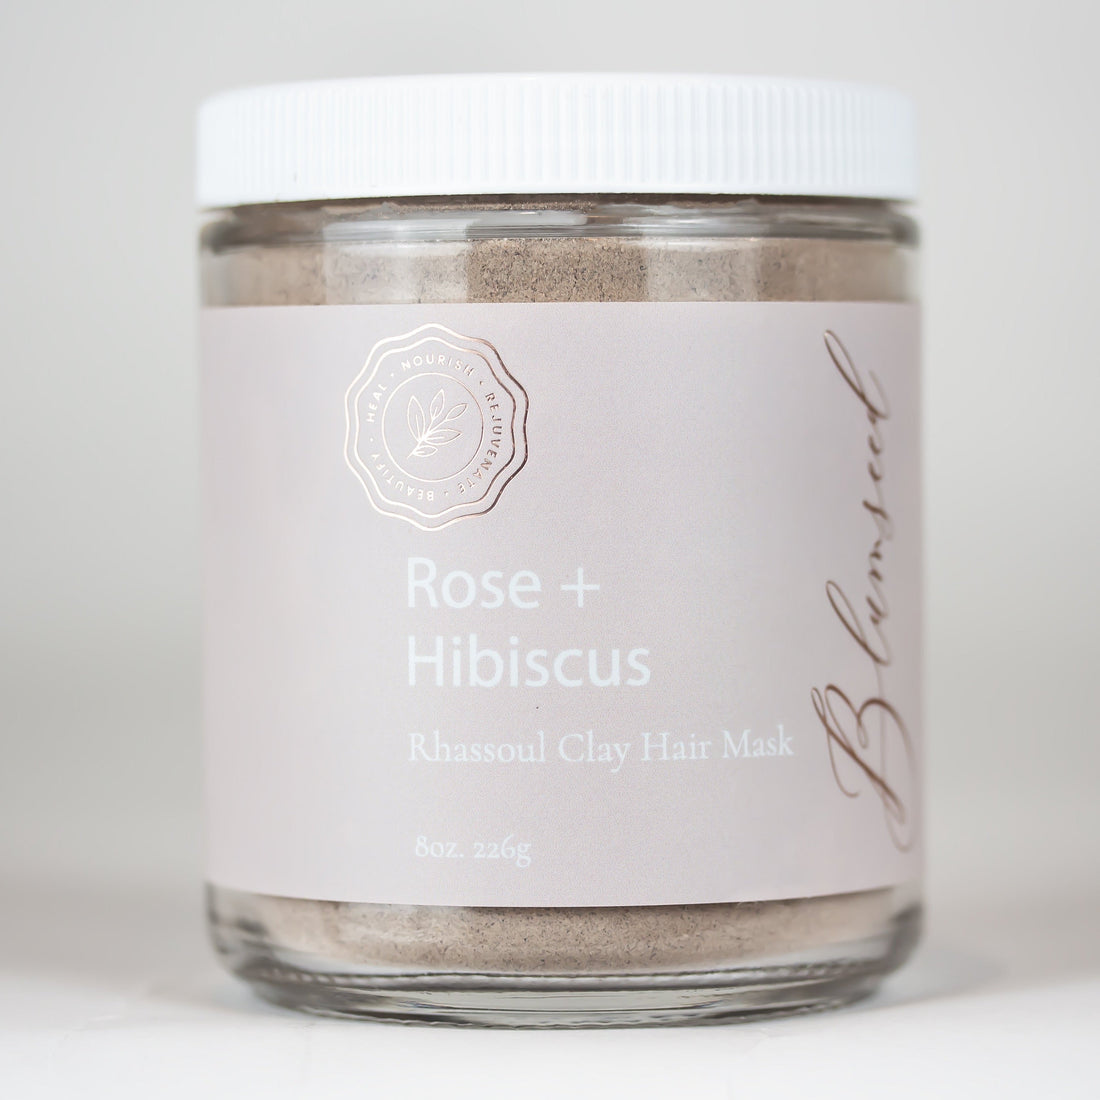 Rose + Hibiscus (Rhassoul Clay Hair Mask) - Blumseed